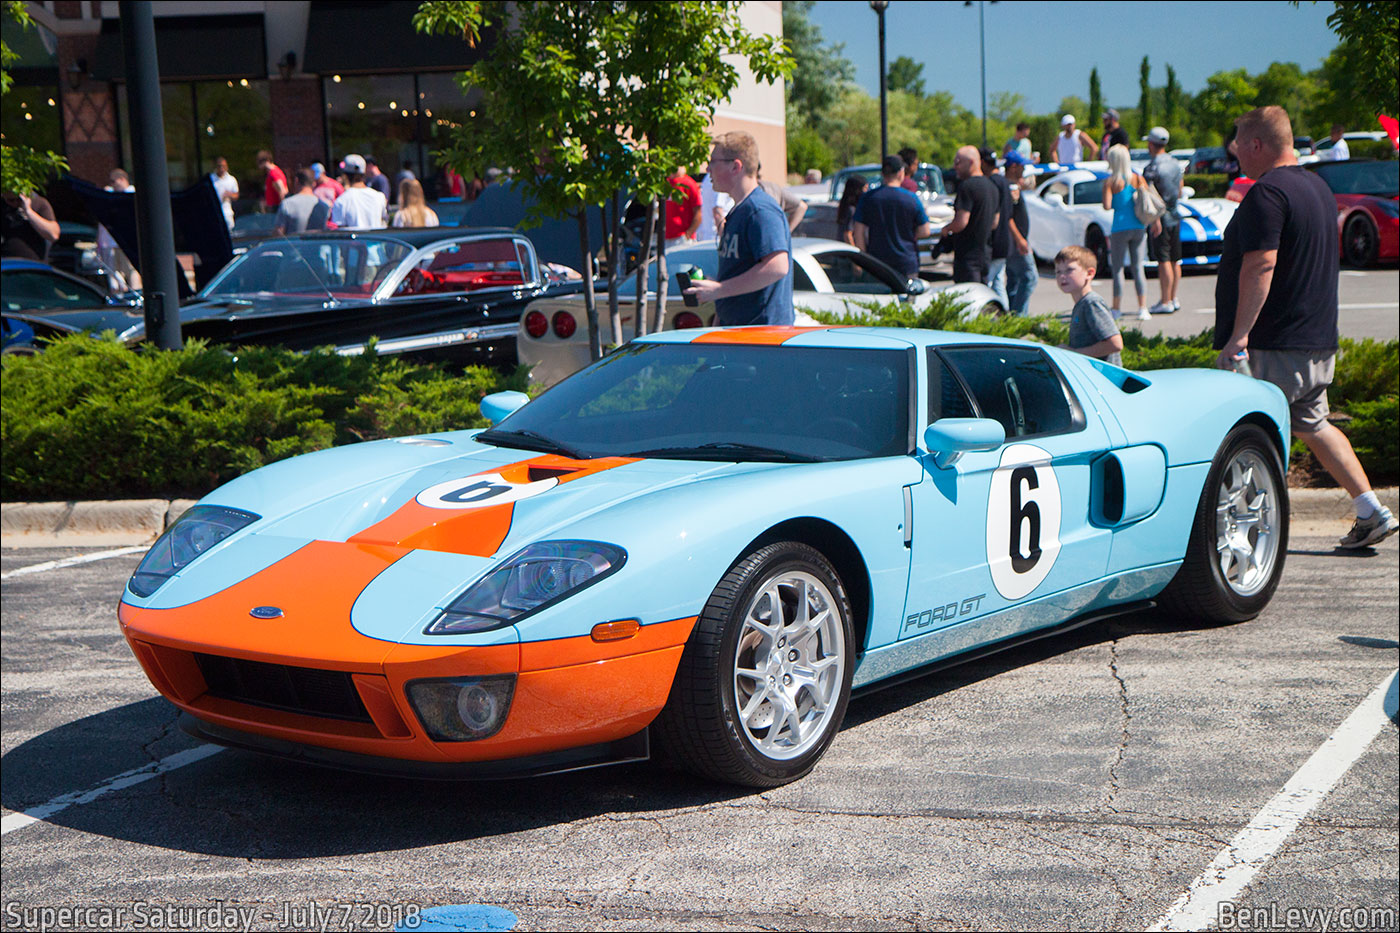 Ford GT in Gulf livery